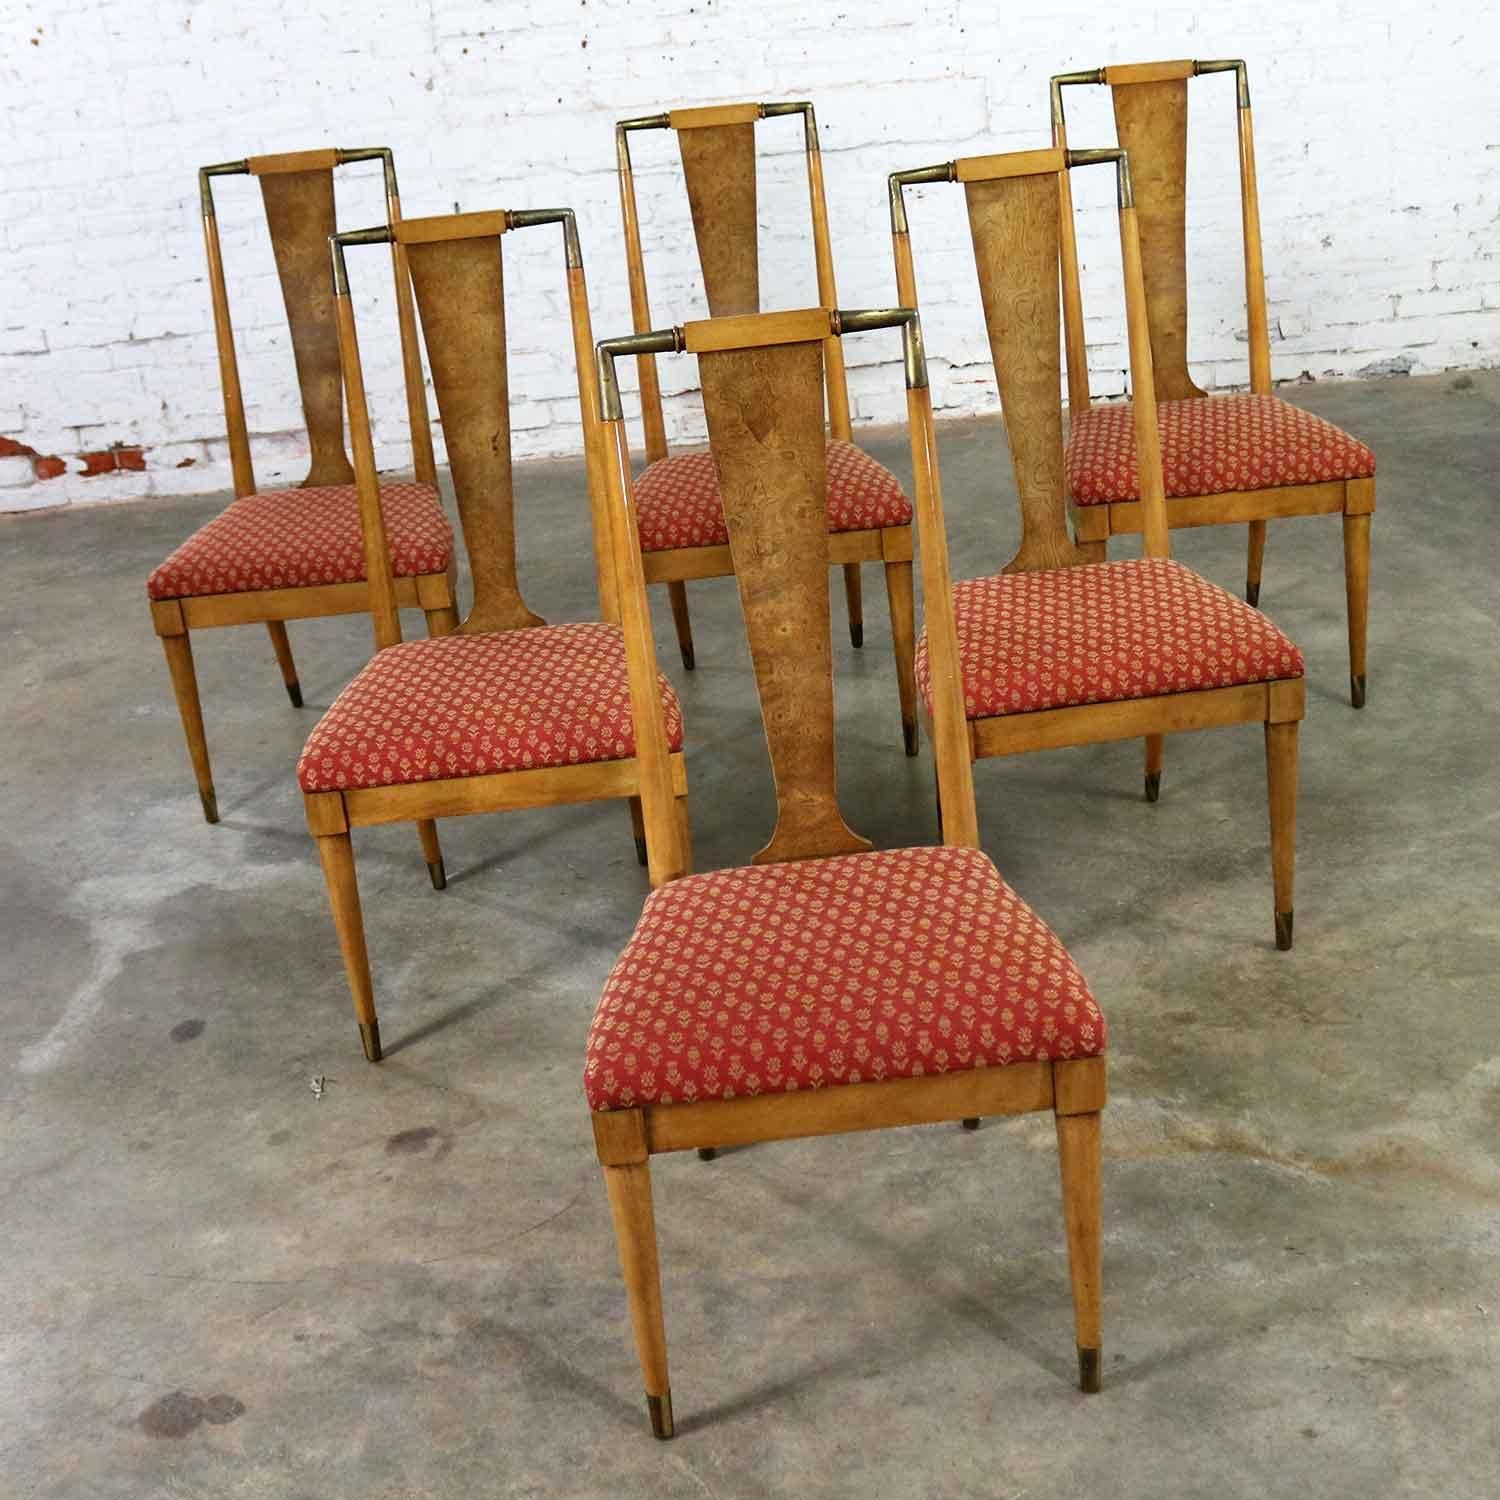 Handsome set of six midcentury dining chairs from J. L. Metz Furniture’s Contempora line designed by William J. Clingman. They are not marked but well documented and in fabulous vintage condition, circa 1959.

If you are looking for a set of